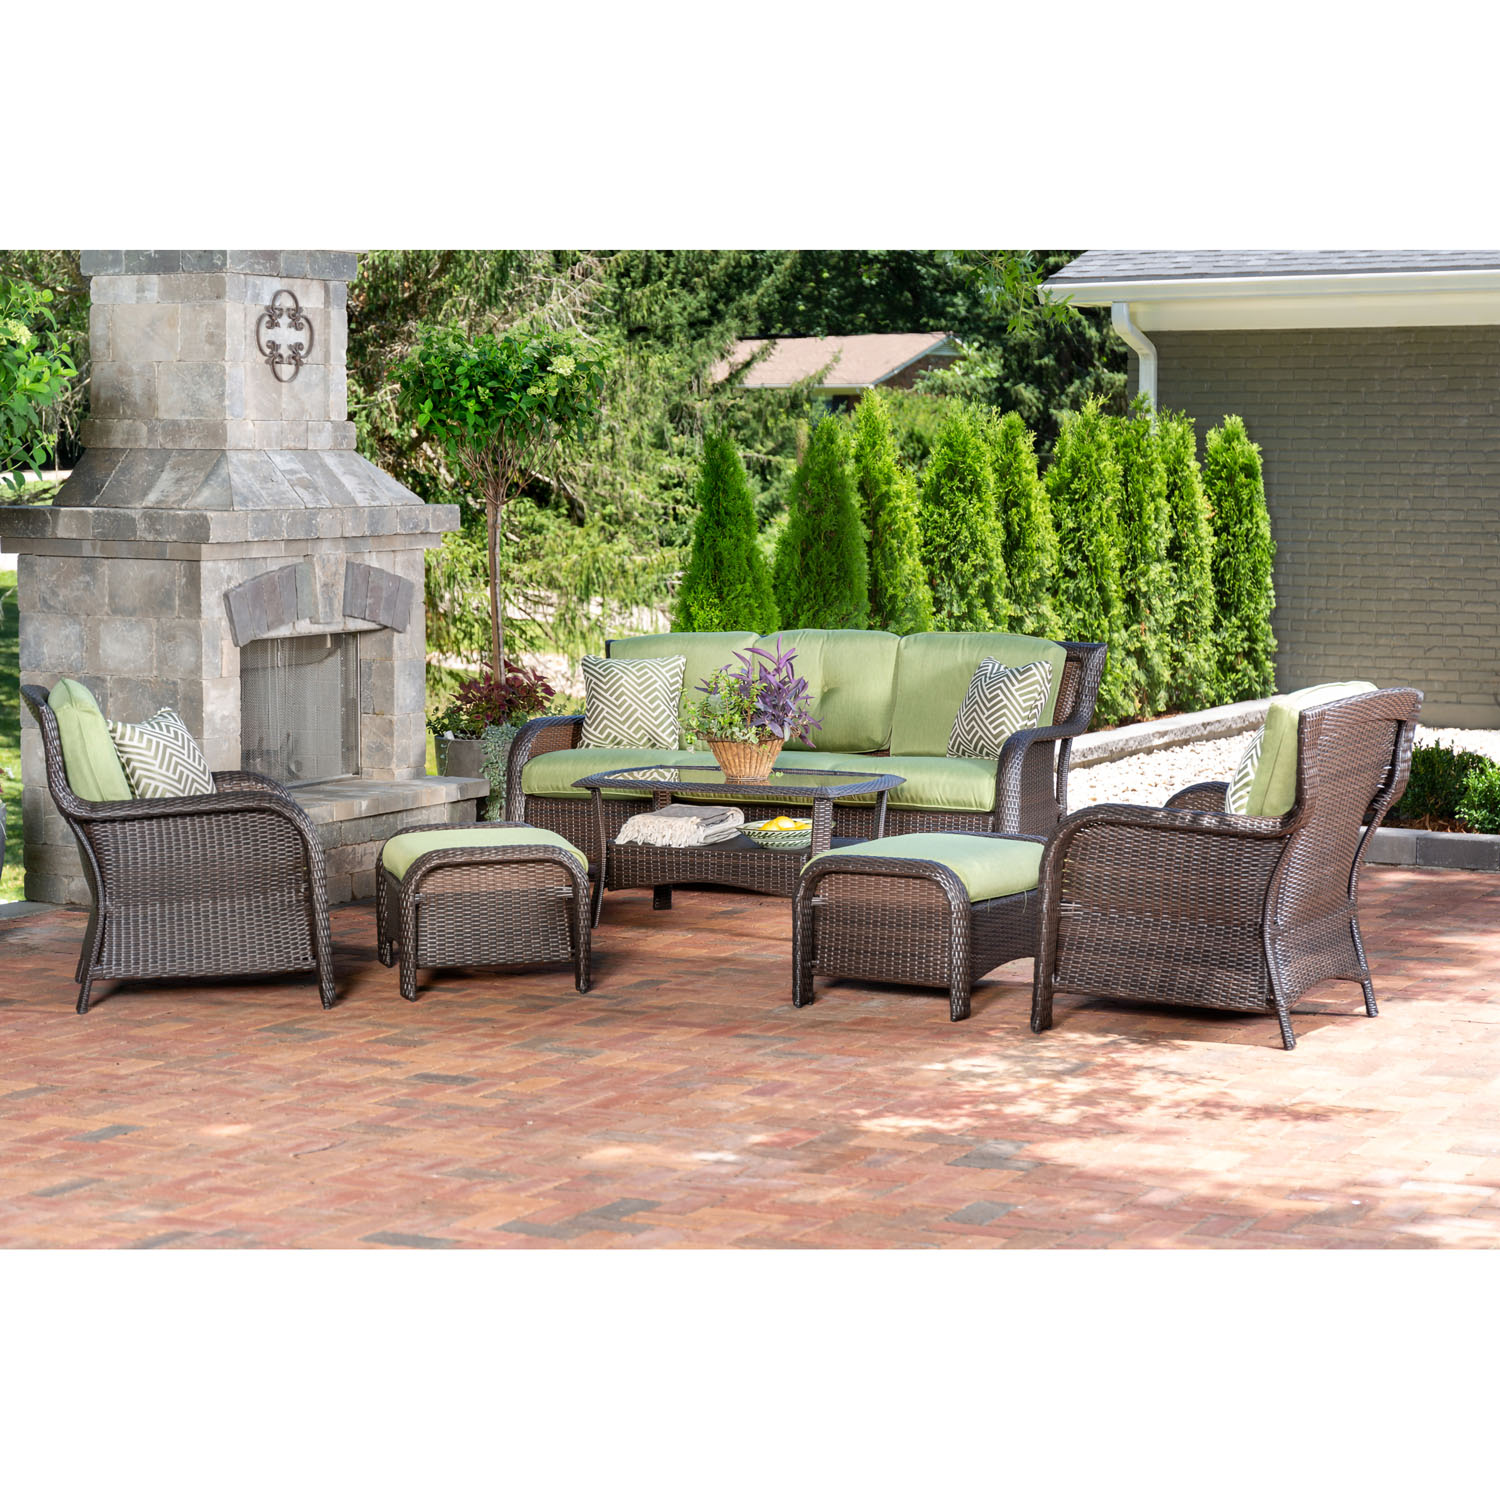 Hanover Strathmere 6-Piece Wicker and Steel Outdoor Conversation Set, Cilantro Green - image 3 of 18